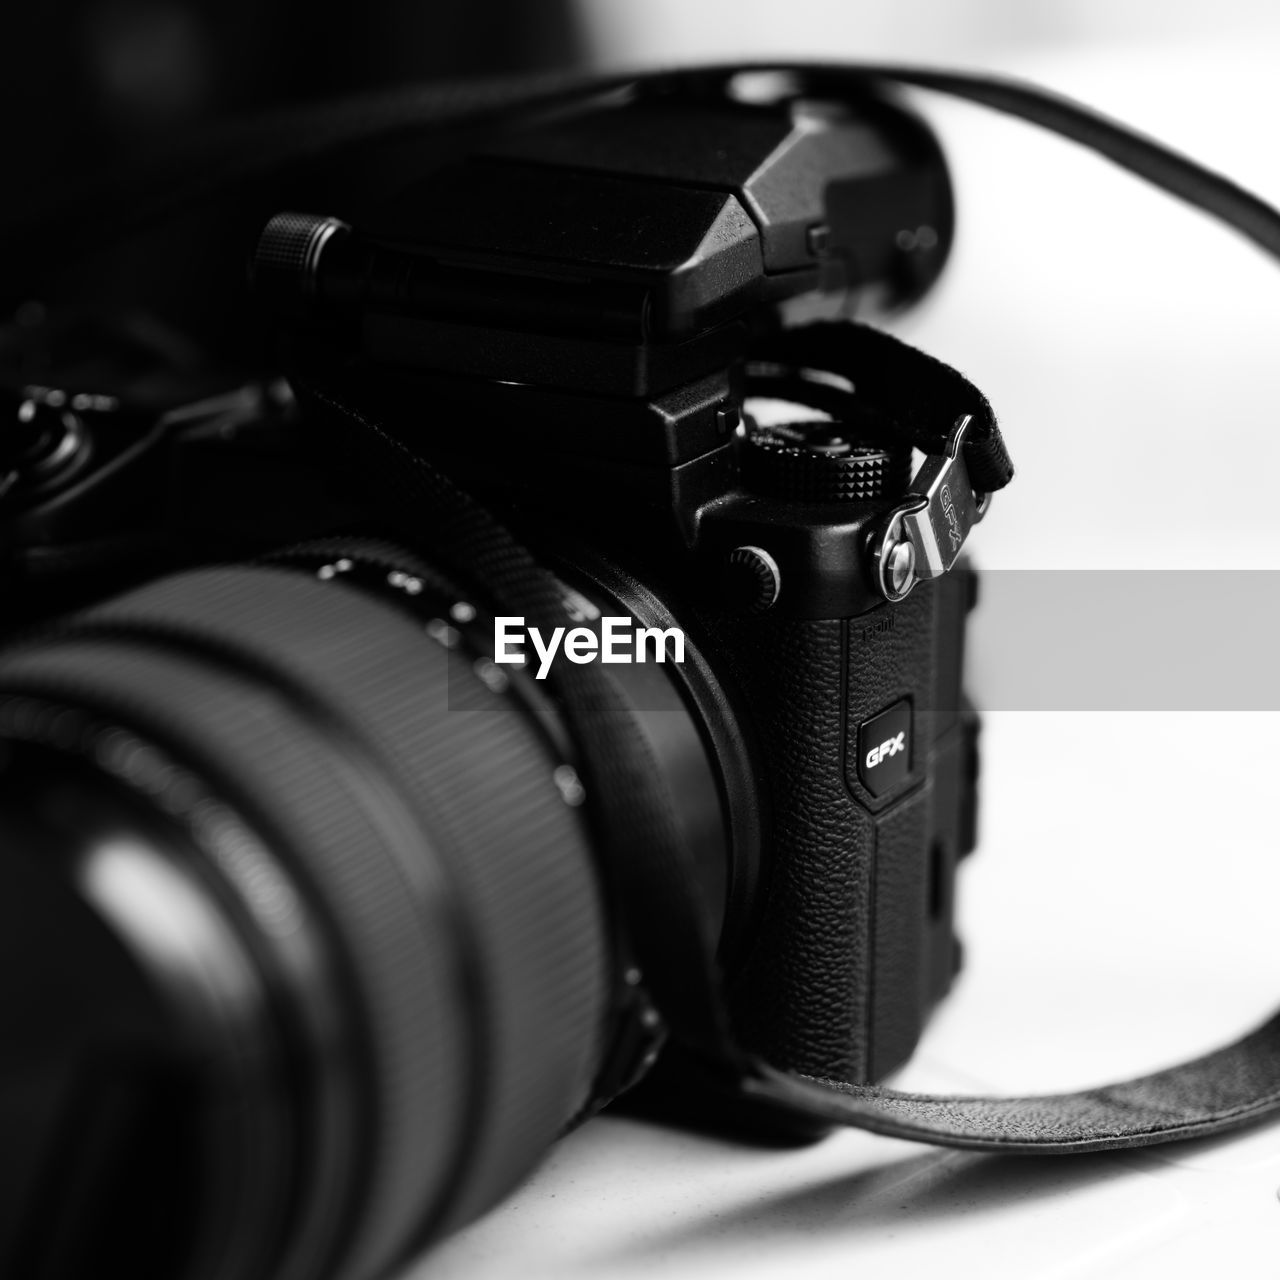 technology, camera, lens - optical instrument, digital slr, black, camera lens, black and white, photographic equipment, lens - eye, close-up, indoors, no people, equipment, monochrome, arts culture and entertainment, monochrome photography, activity, single object